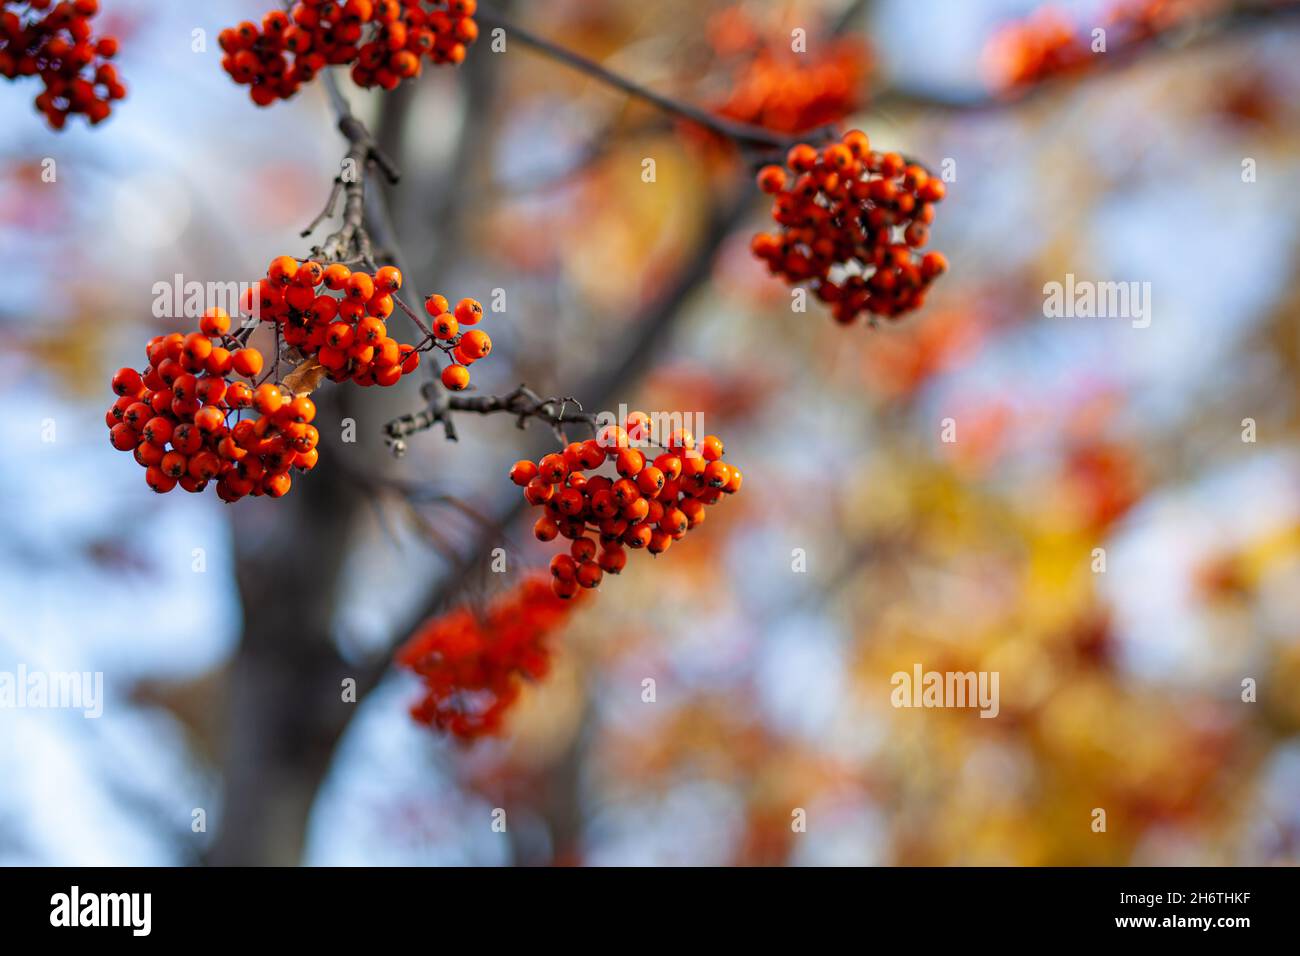 Berries of mountain ash branches are red on a blurry autumn background. Autumn harvest still life scene. Soft focus backdrop photography. Copy space. Stock Photo